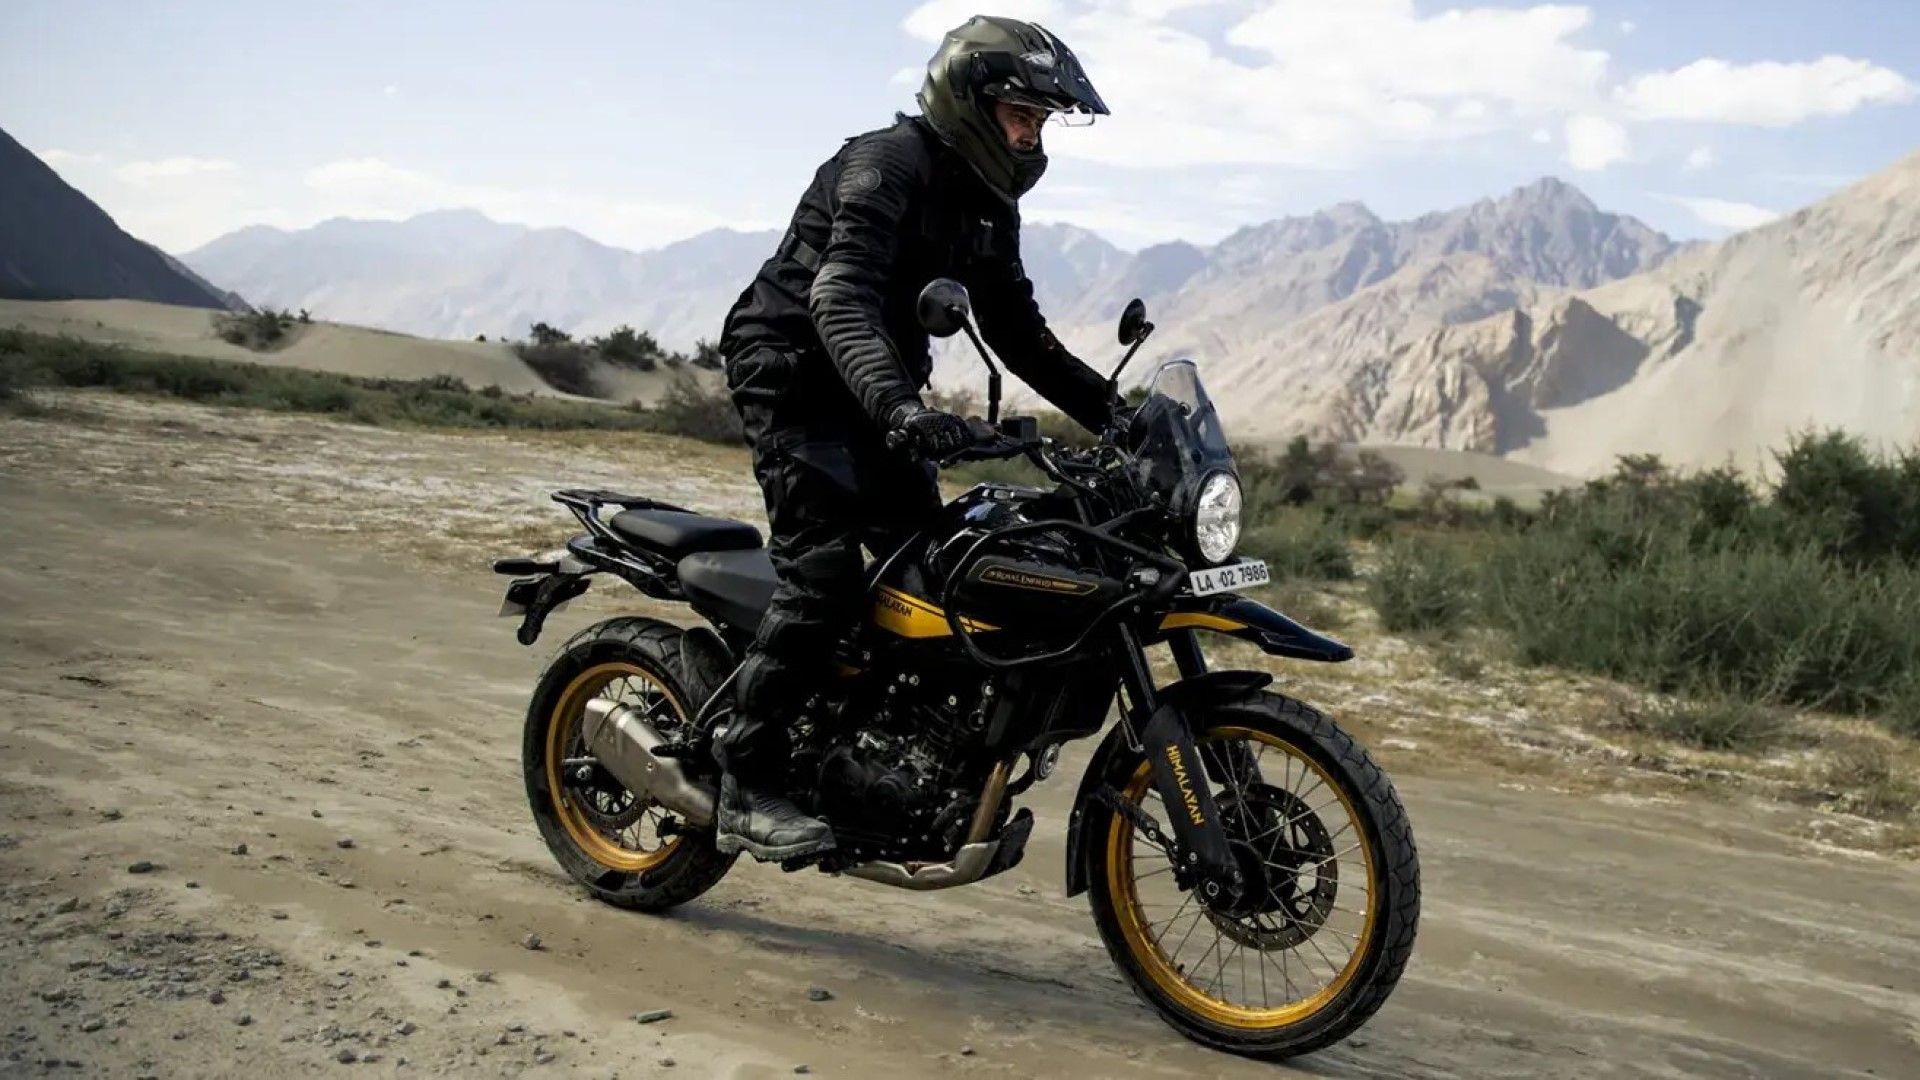 Royal Enfield Himalayan 450 Price Revealed: Royal Enfield All-New